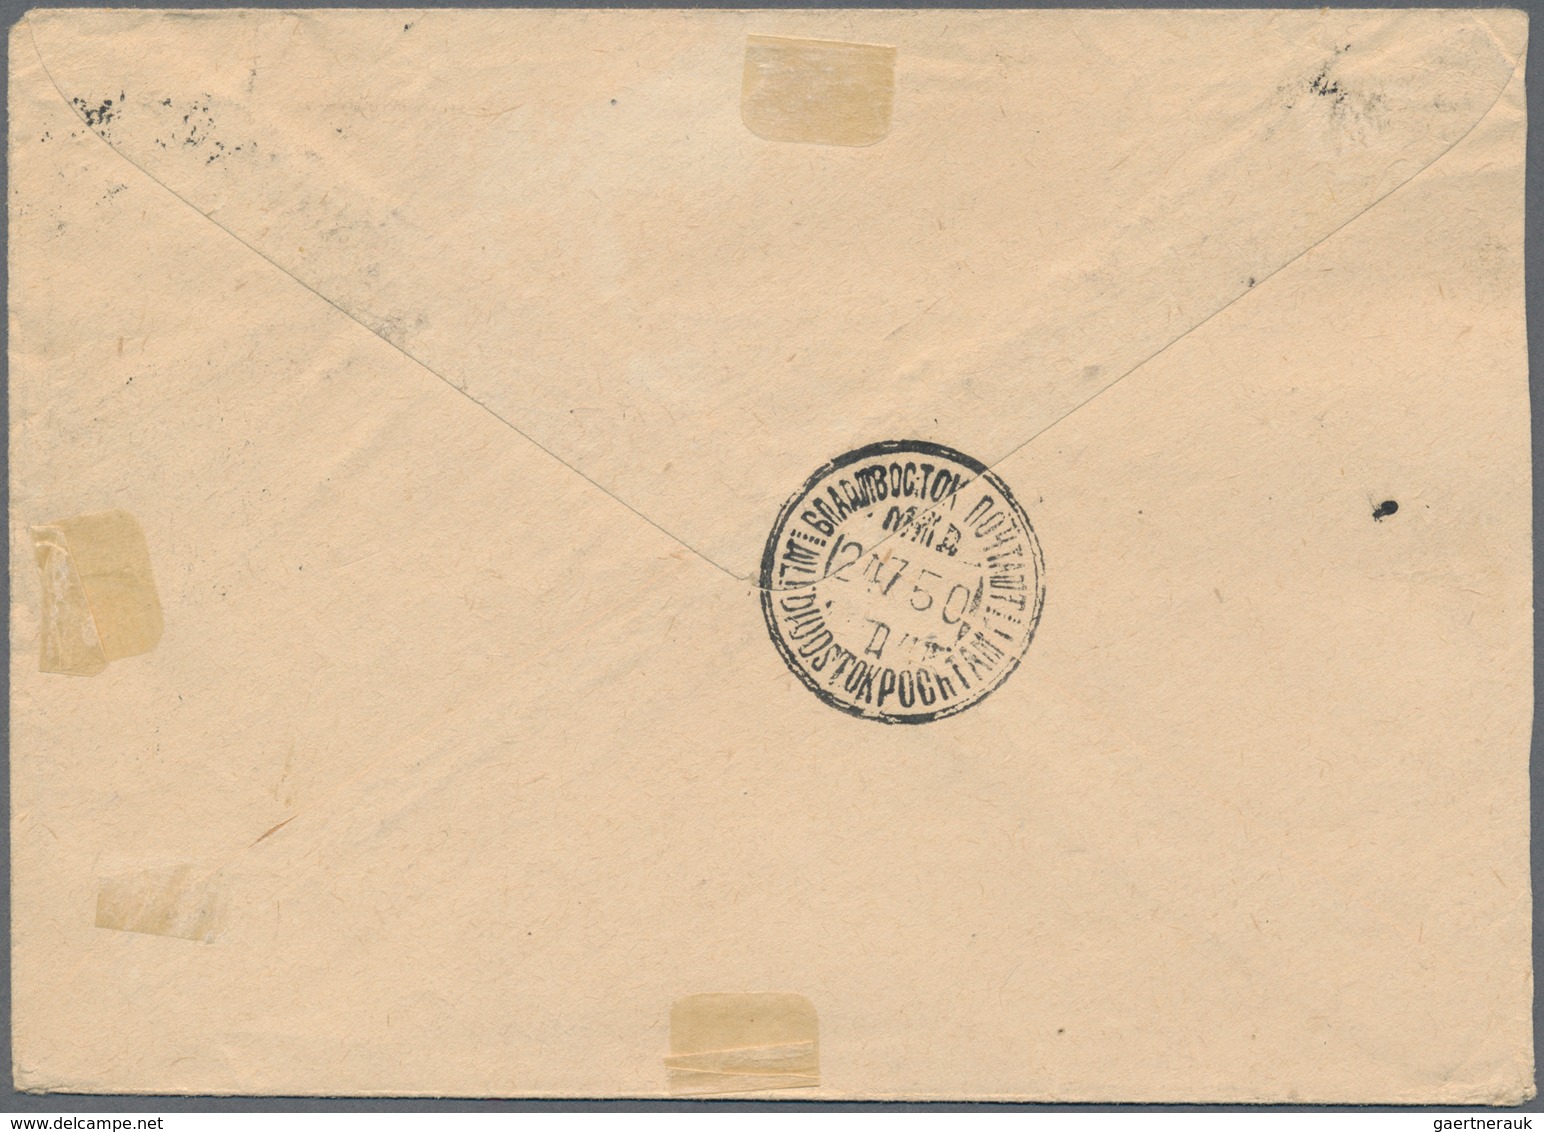 Korea-Nord: 1950, incoming mail from USSR, four covers (inc. 3 registered inc. one uprated stationer